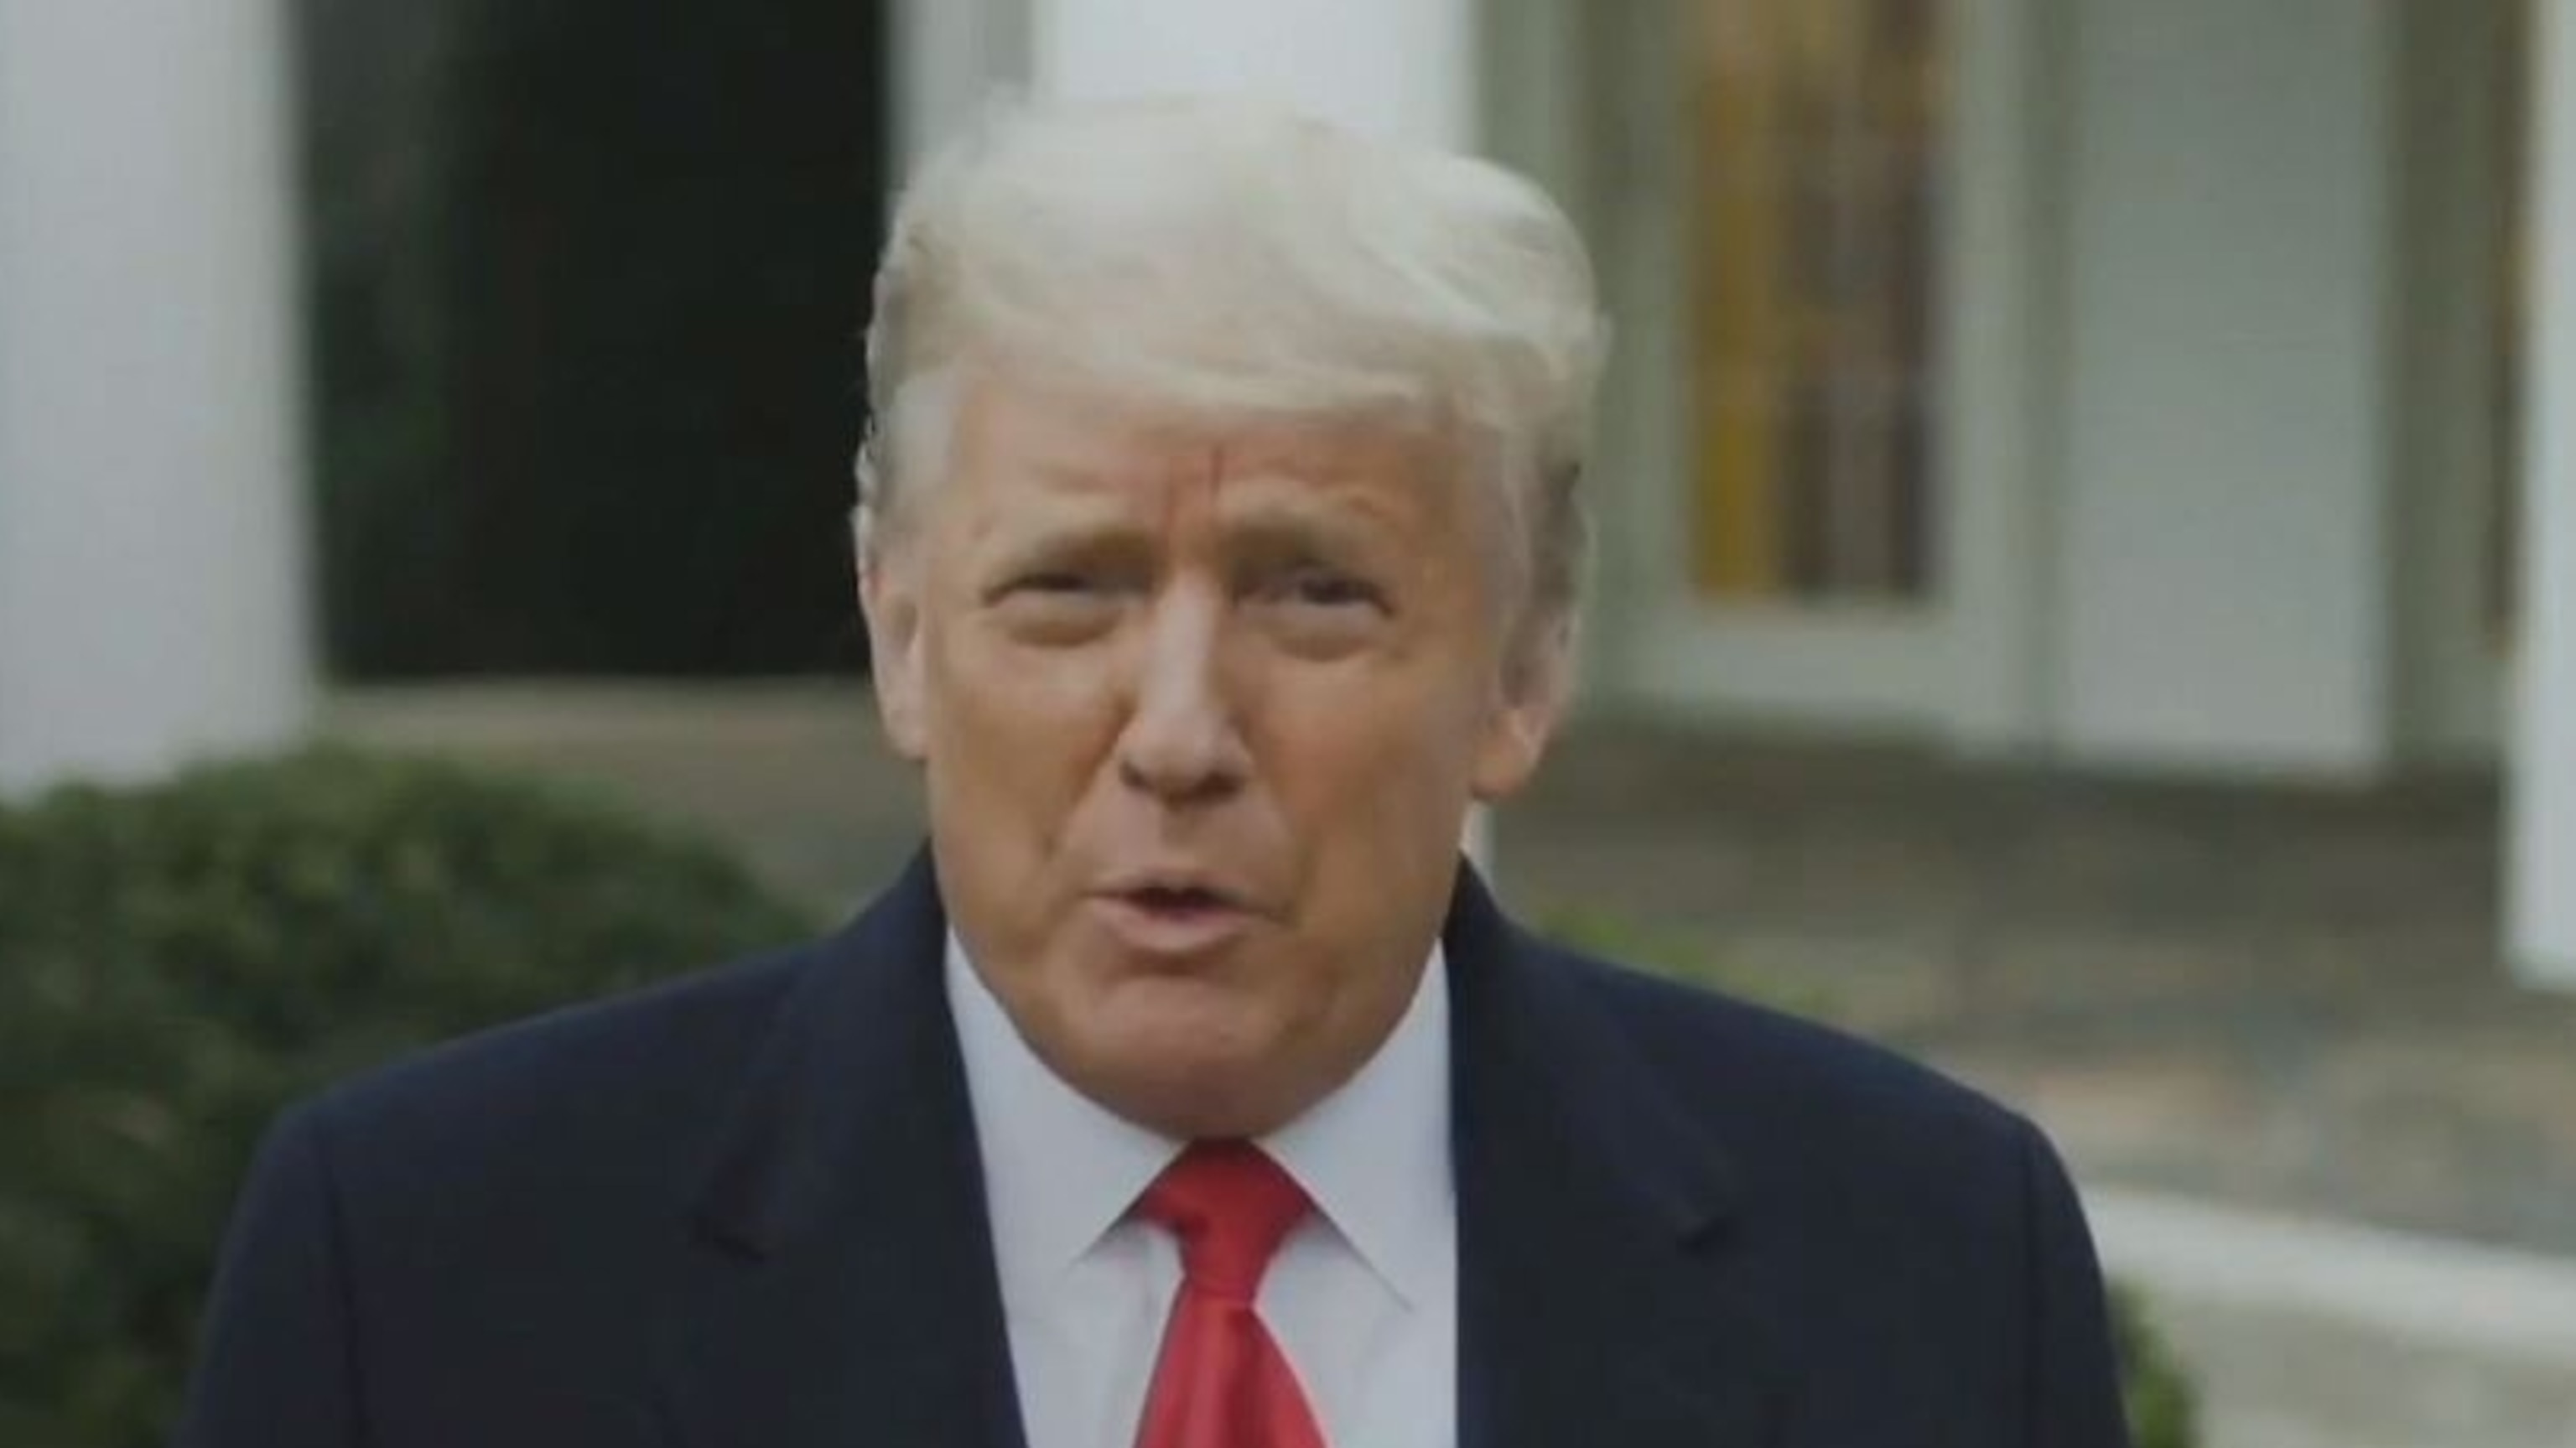 PHOTO: In a video message posted to Twitter on the afternoon of Jan. 6, 2021, President Donald Trump addresses supporters participating in the attack on the U.S. Capitol.